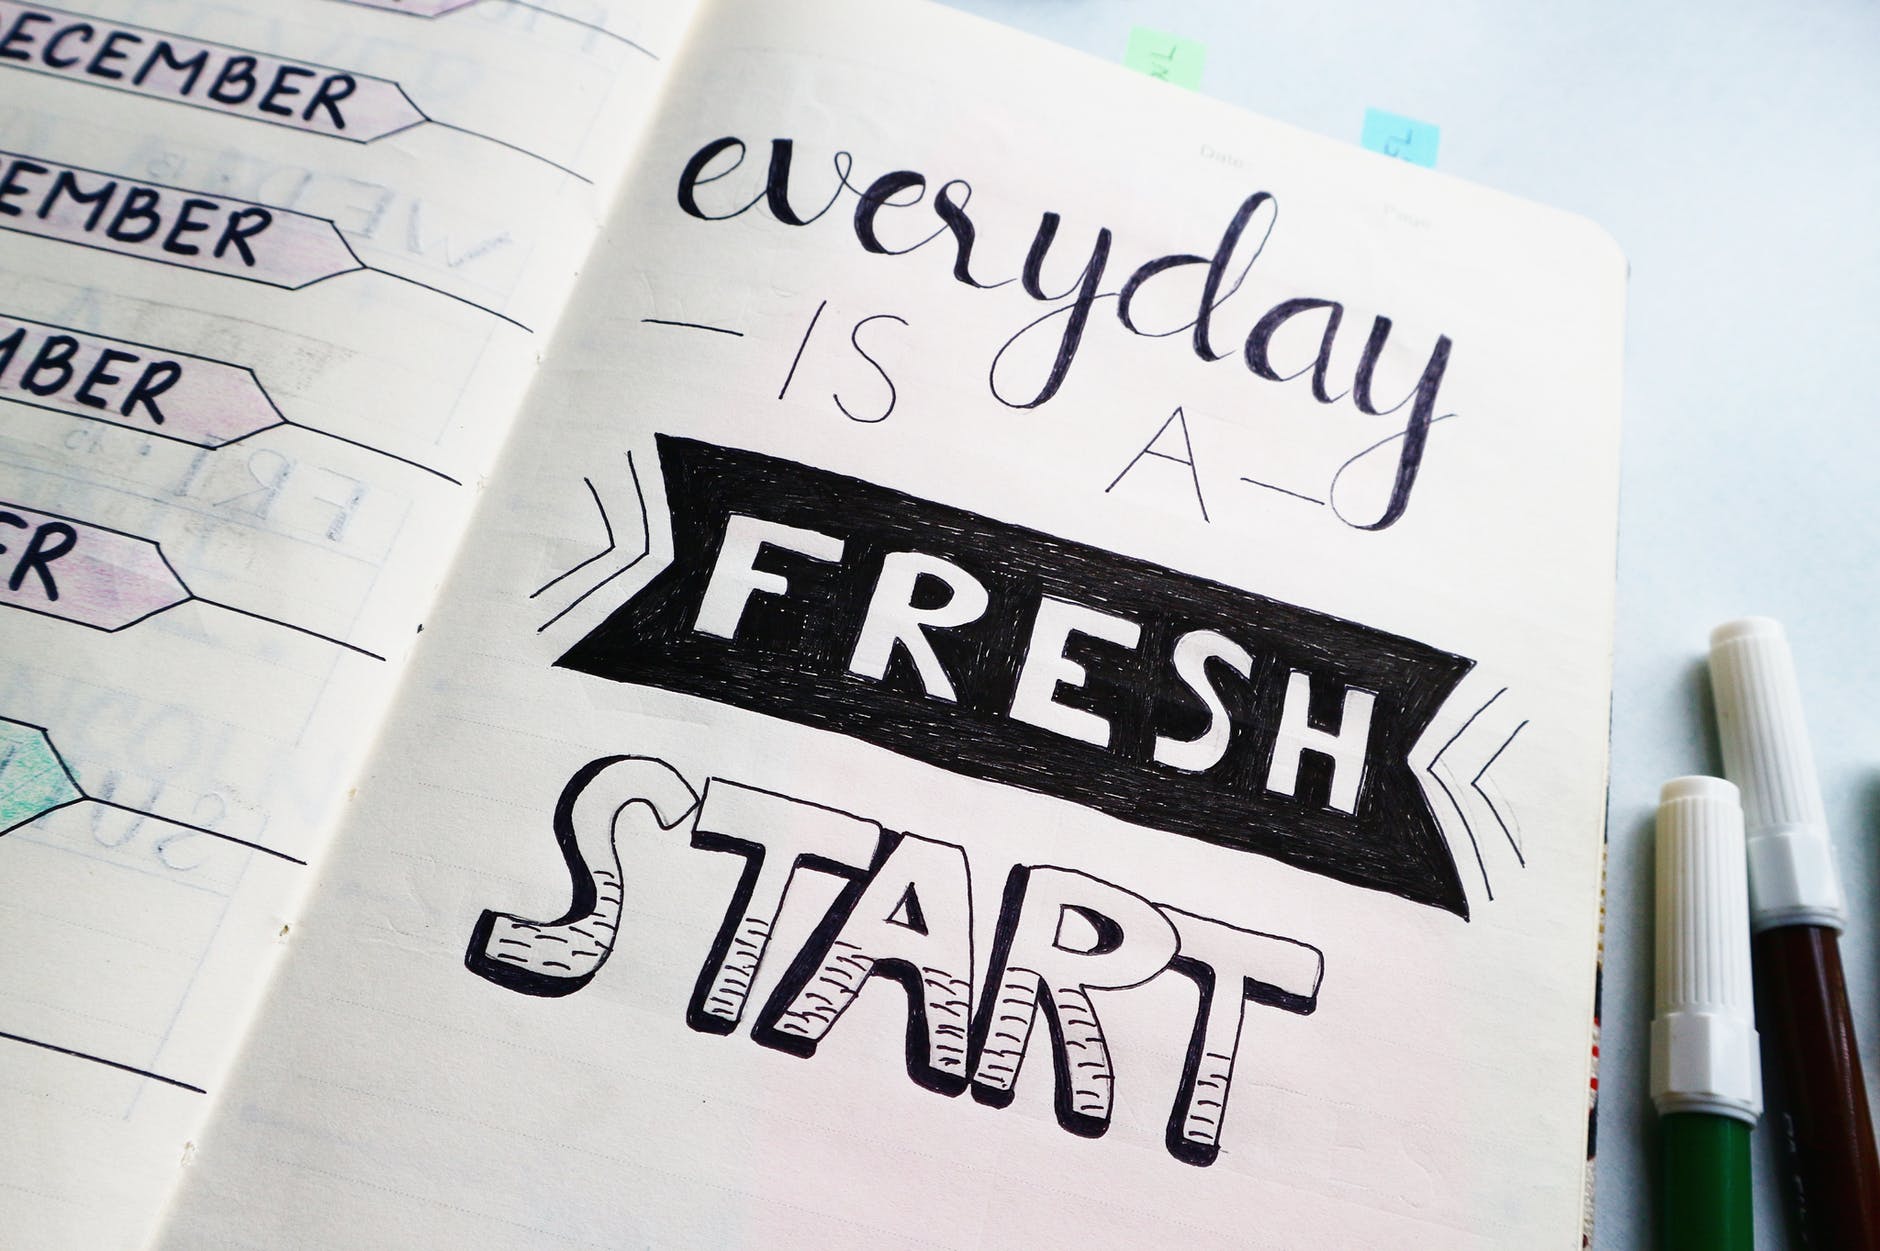 inspirational quotes on a planner "Everyday is a fresh start."